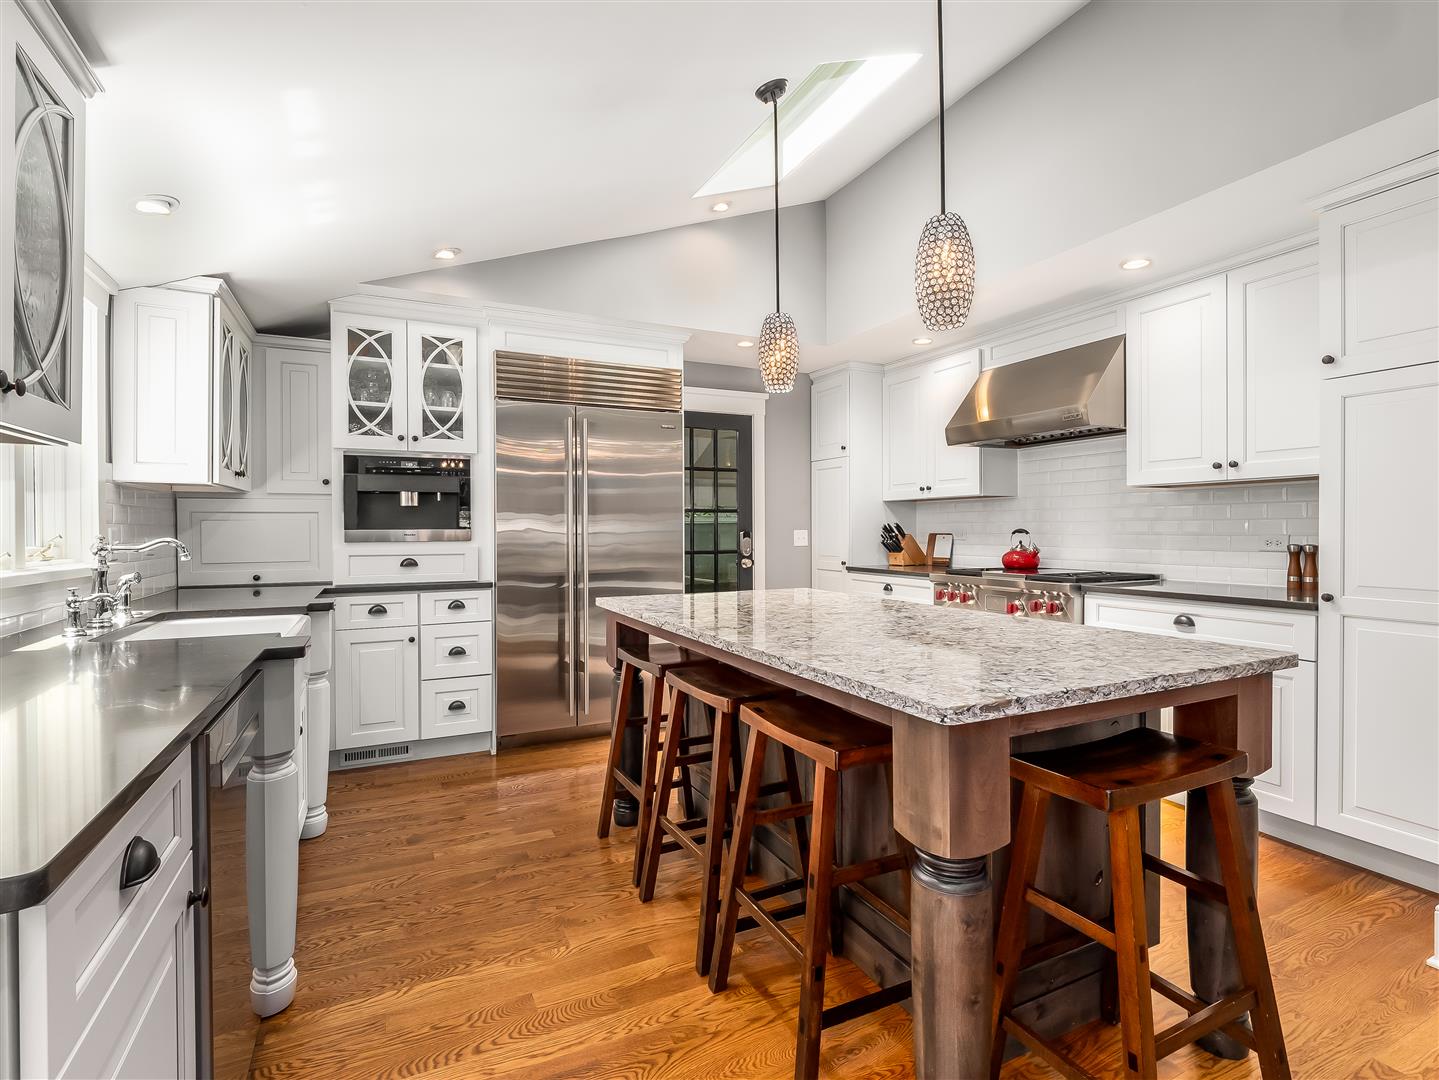 White Kitchen with Decorative Glass Upper Cabinet Doors stainless steal appliances,, contrasting dark quartz countertops and a natural wood stain island/eat-in bar.